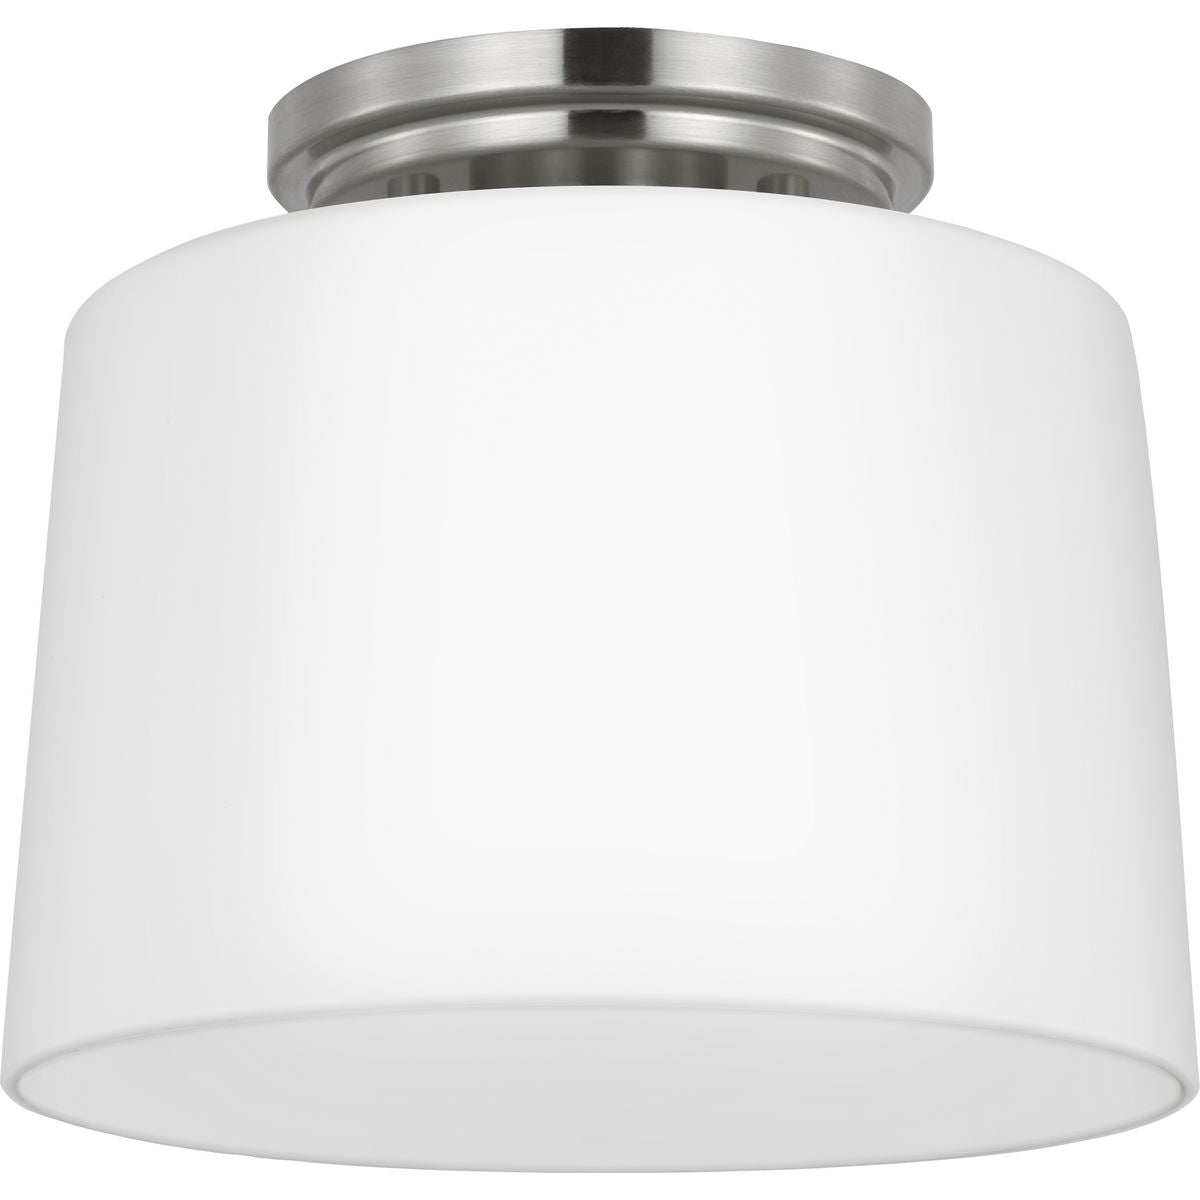 Progress Lighting Adley Collection One-Light Flush Mount Clost-To-Ceiling Fixture Brushed Nickel (P350260-009)